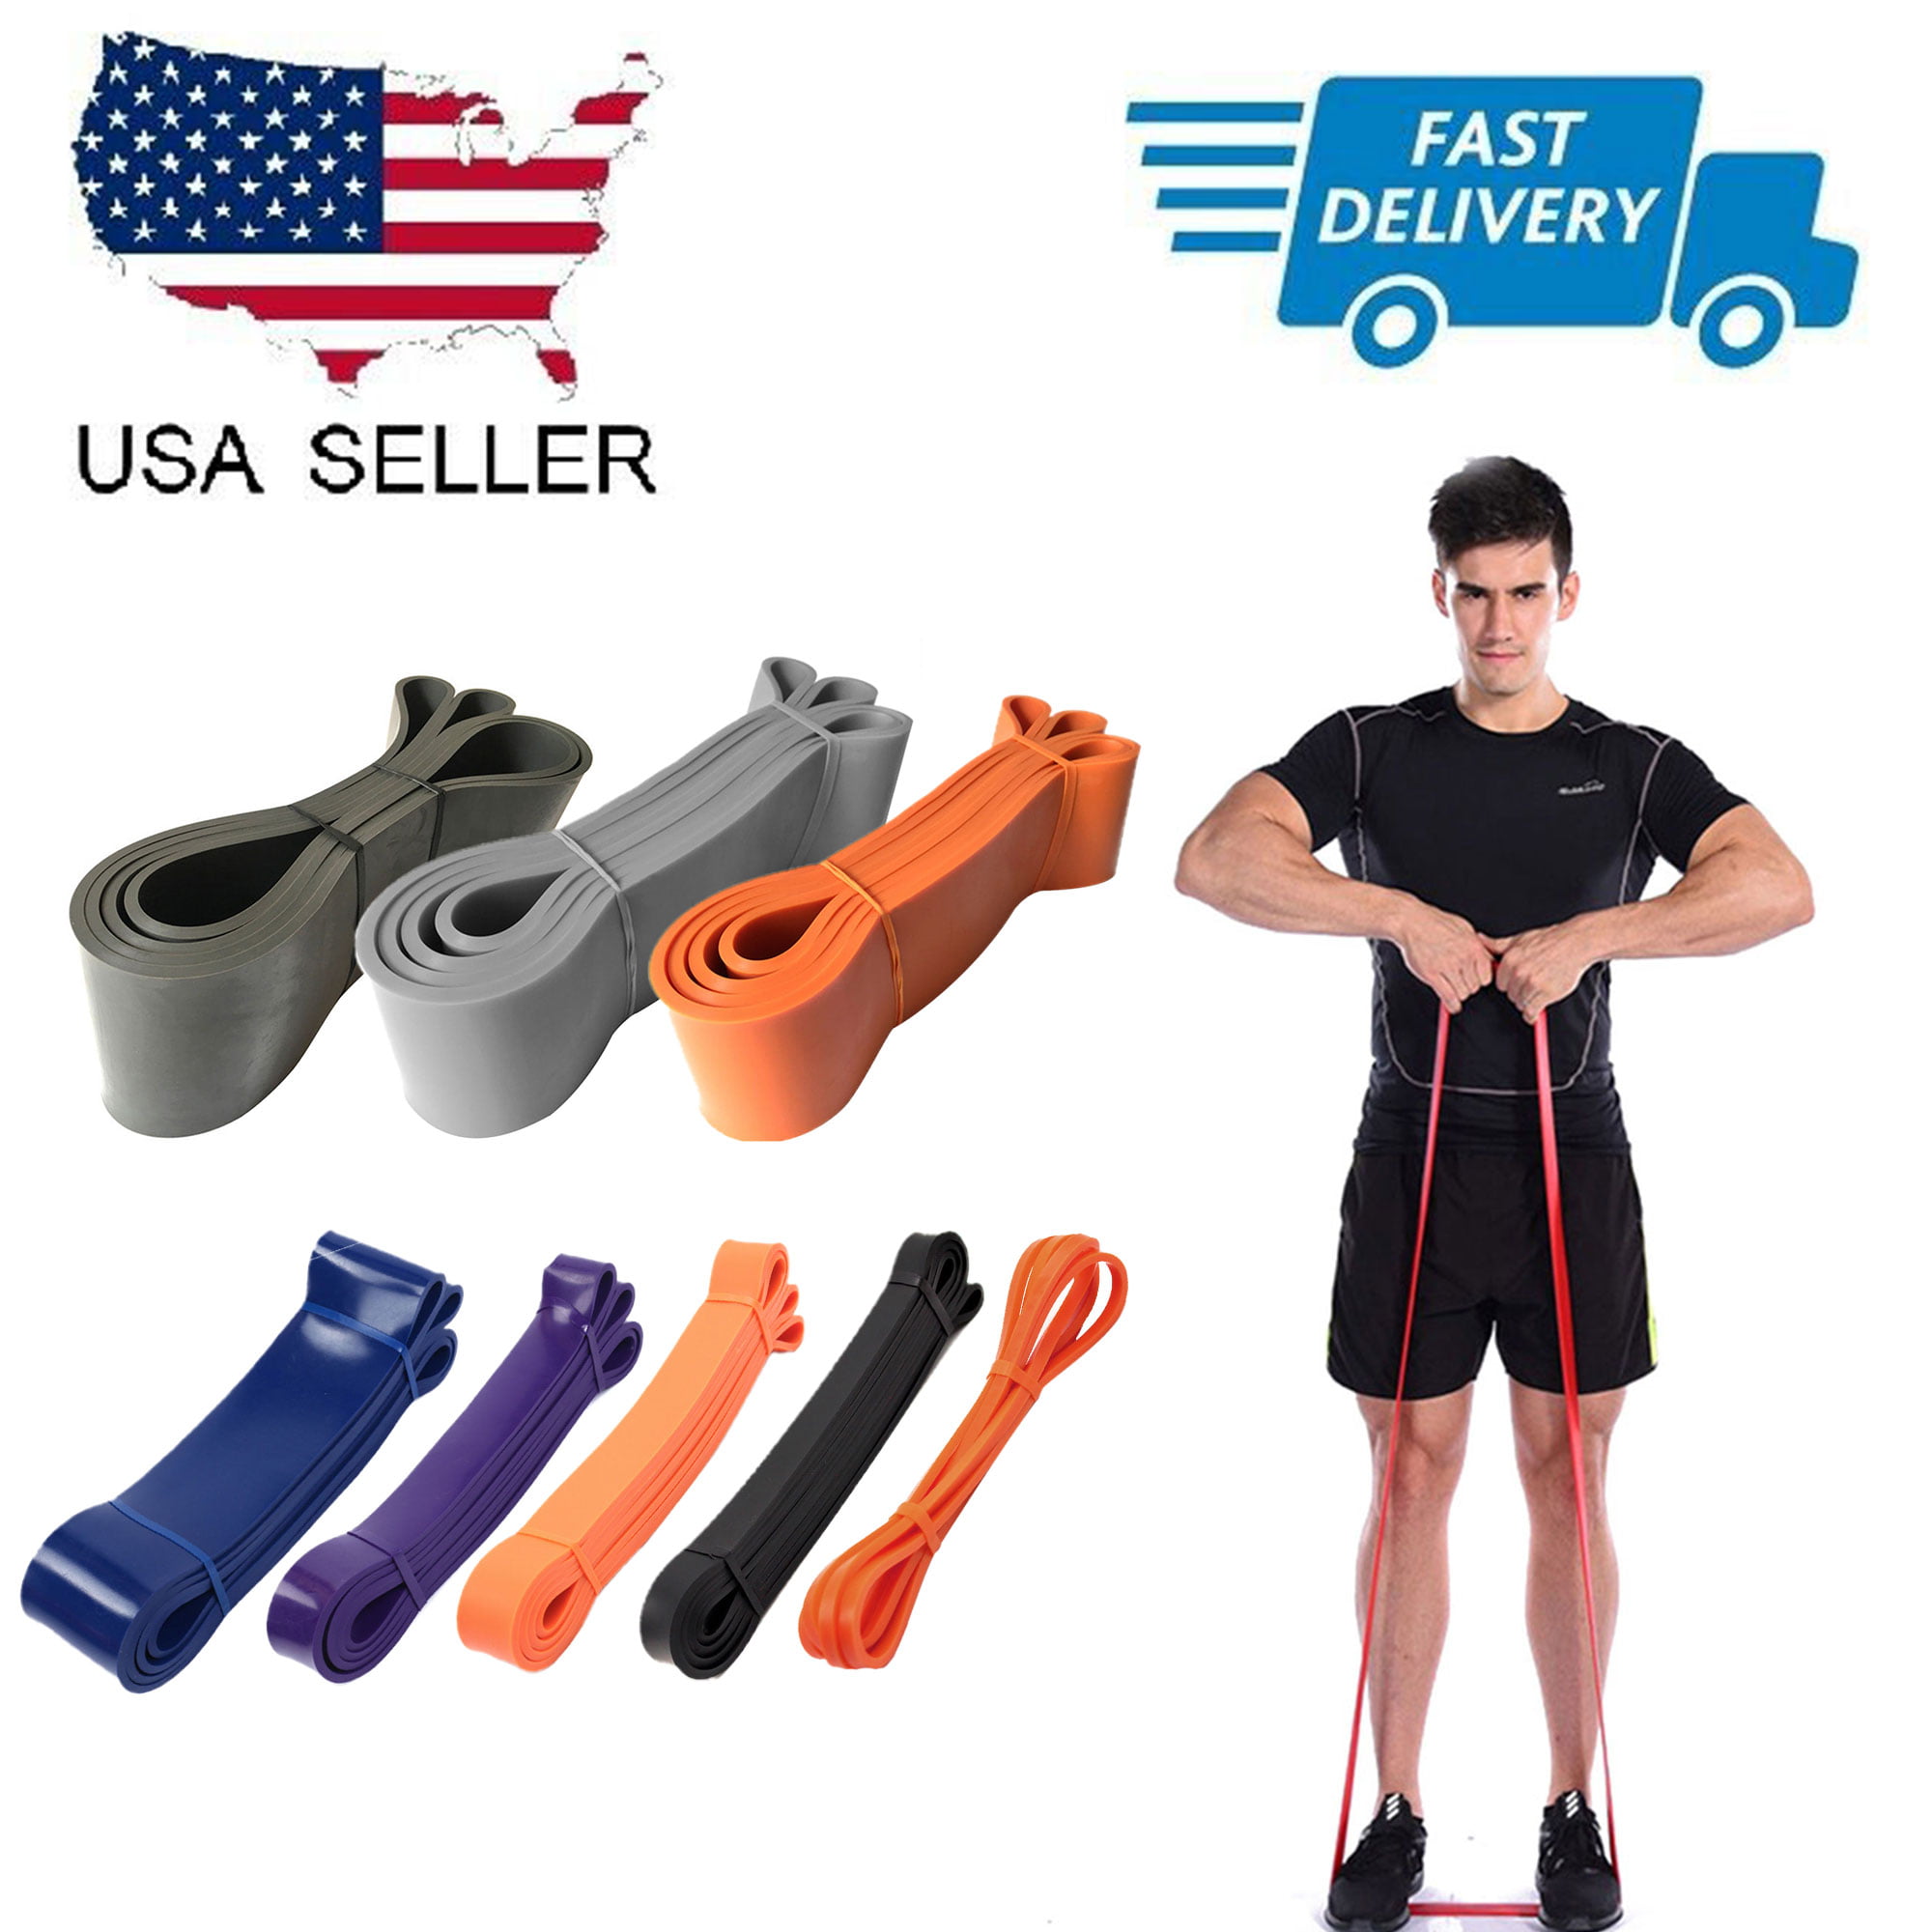 5 PCS Resistance Bands Loop Yoga Pull Up Exercise Fitness Strength Training F9I1 